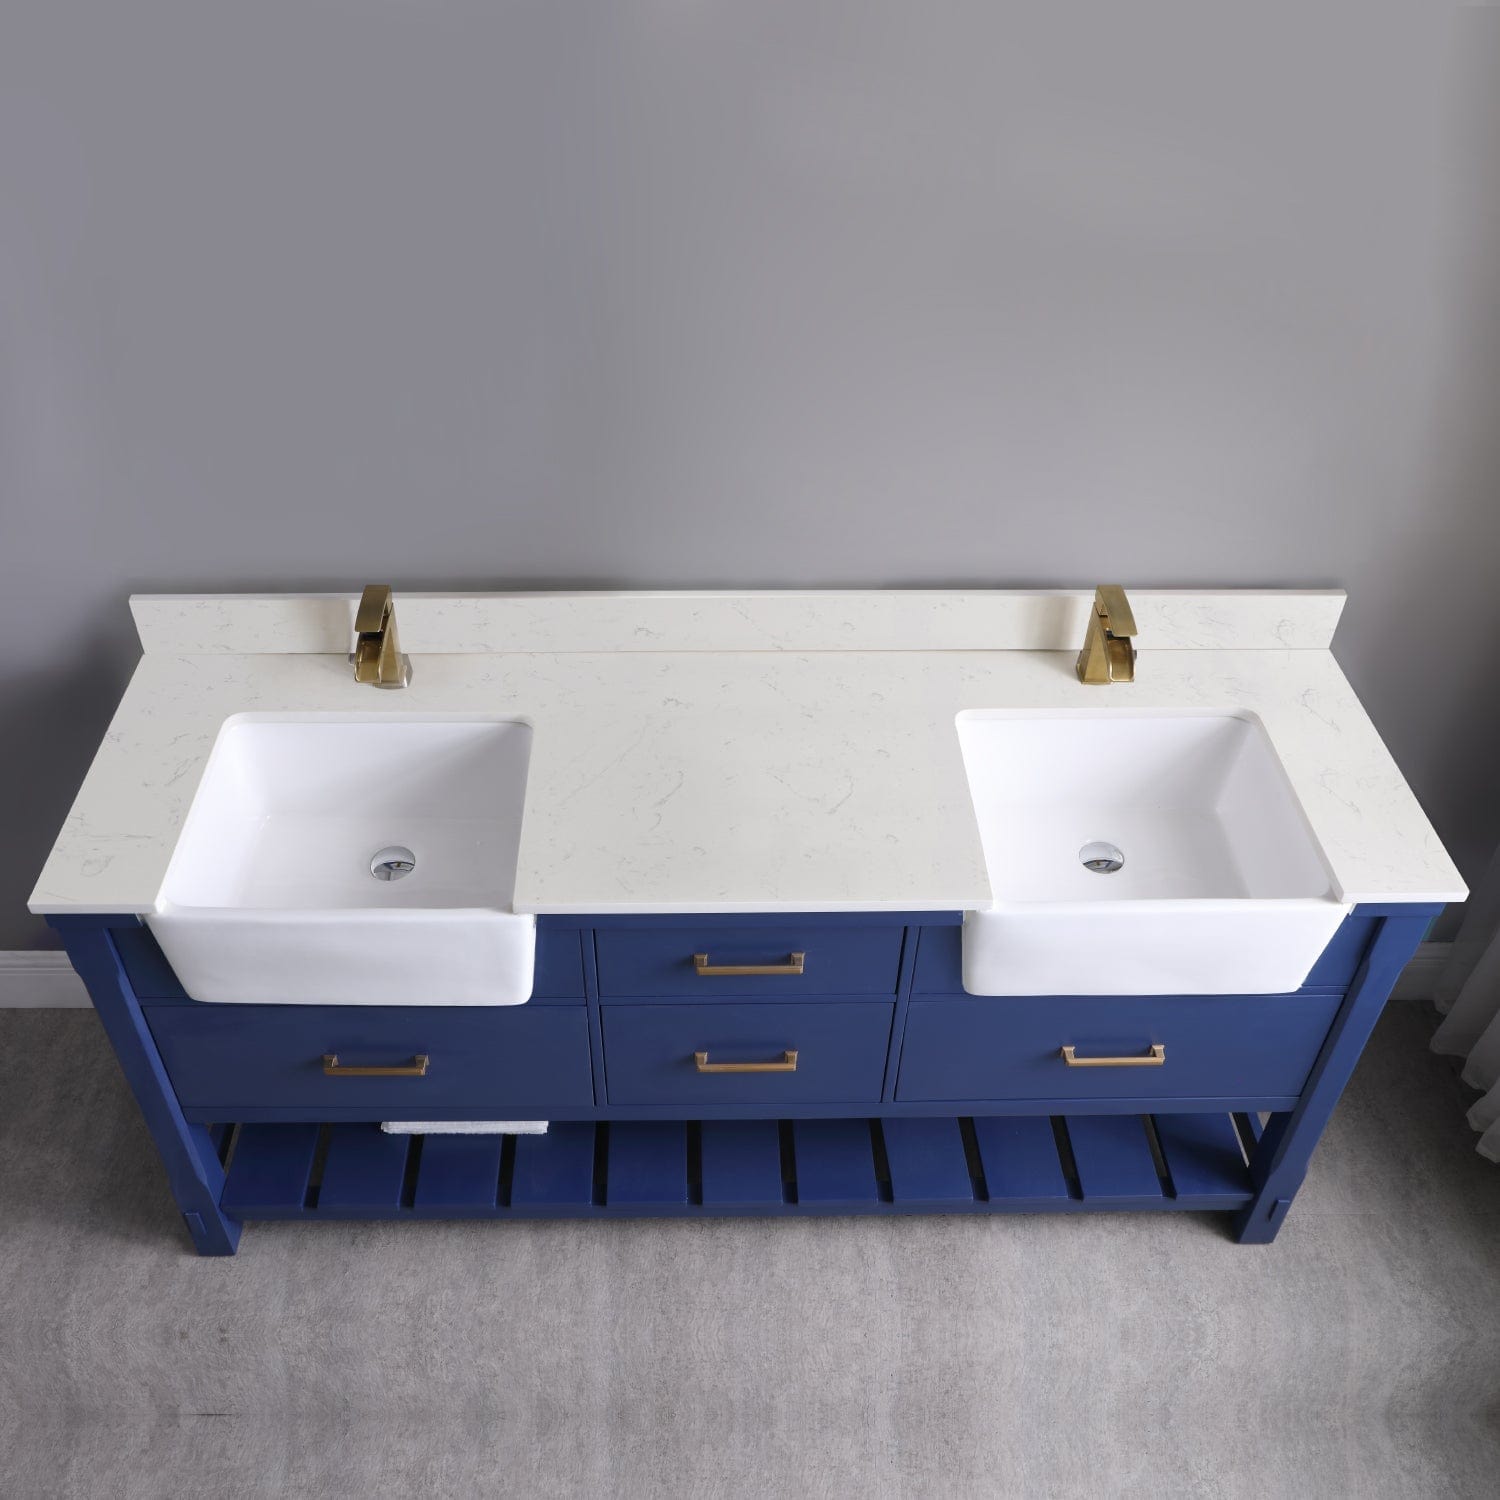 Altair Georgia 72" Double Bathroom Vanity Set in Jewelry Blue and Composite Carrara White Stone Top with White Farmhouse Basin without Mirror 537072-JB-AW-NM - Molaix631112970686Vanity537072-JB-AW-NM